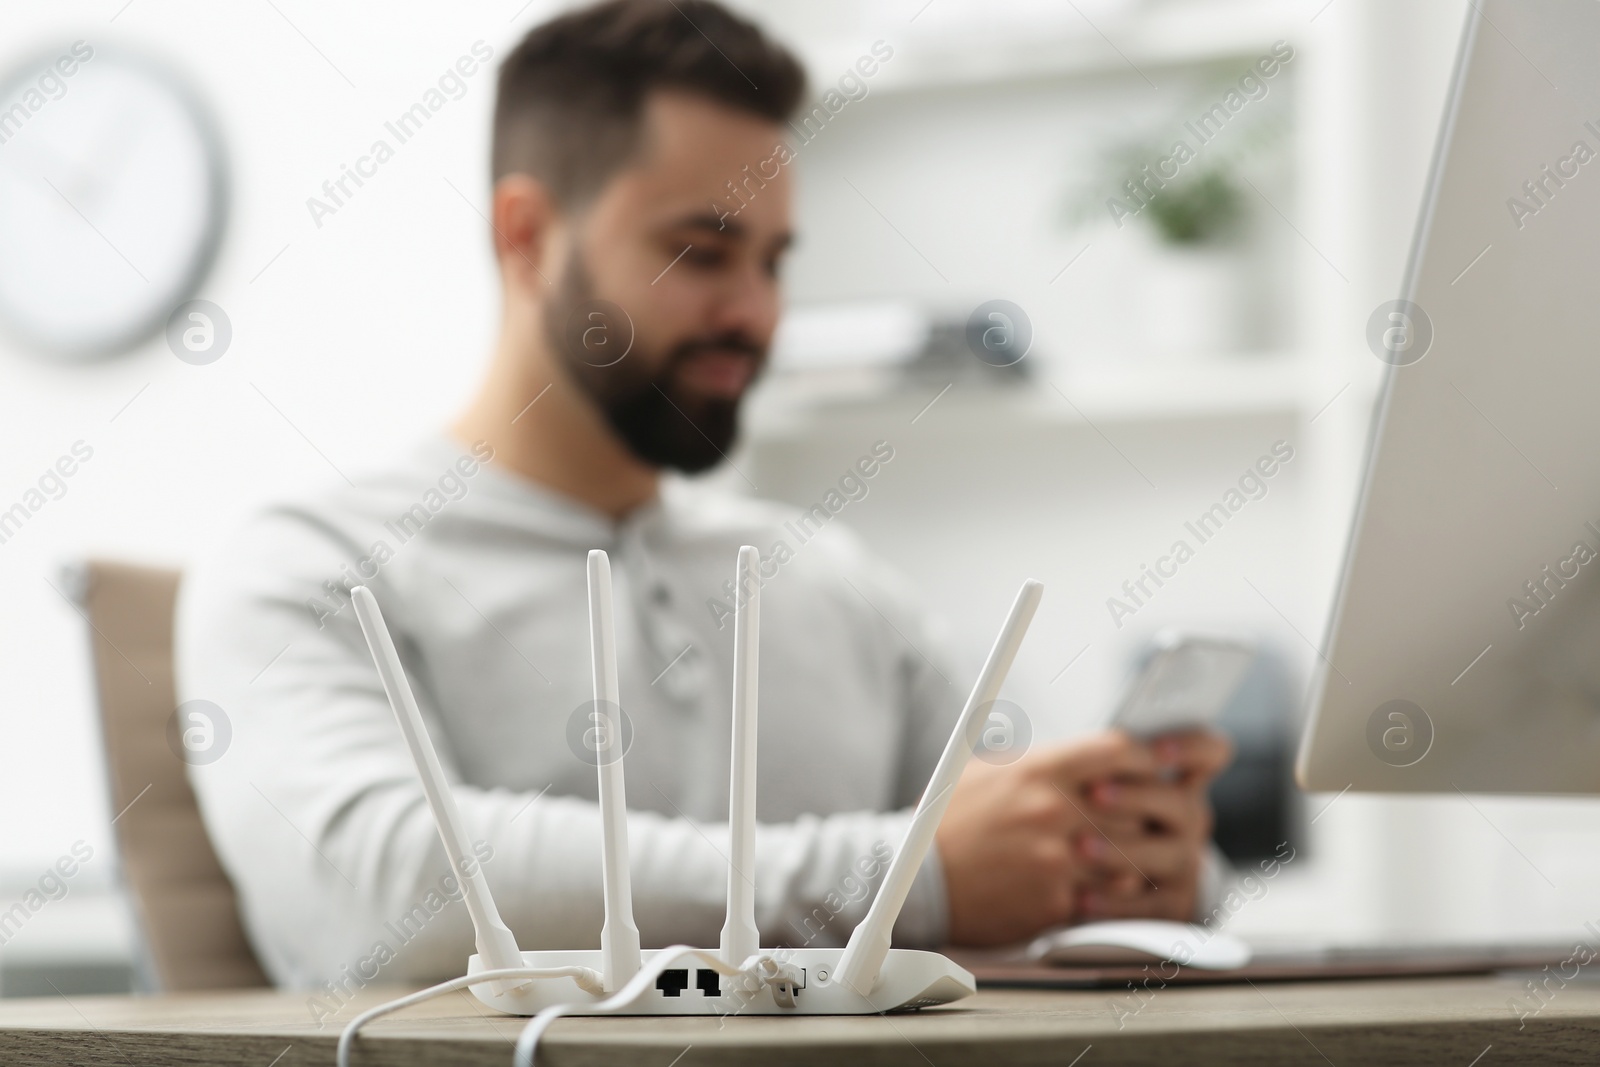 Photo of Man with computer and smartphone working at wooden table, focus on Wi-Fi router